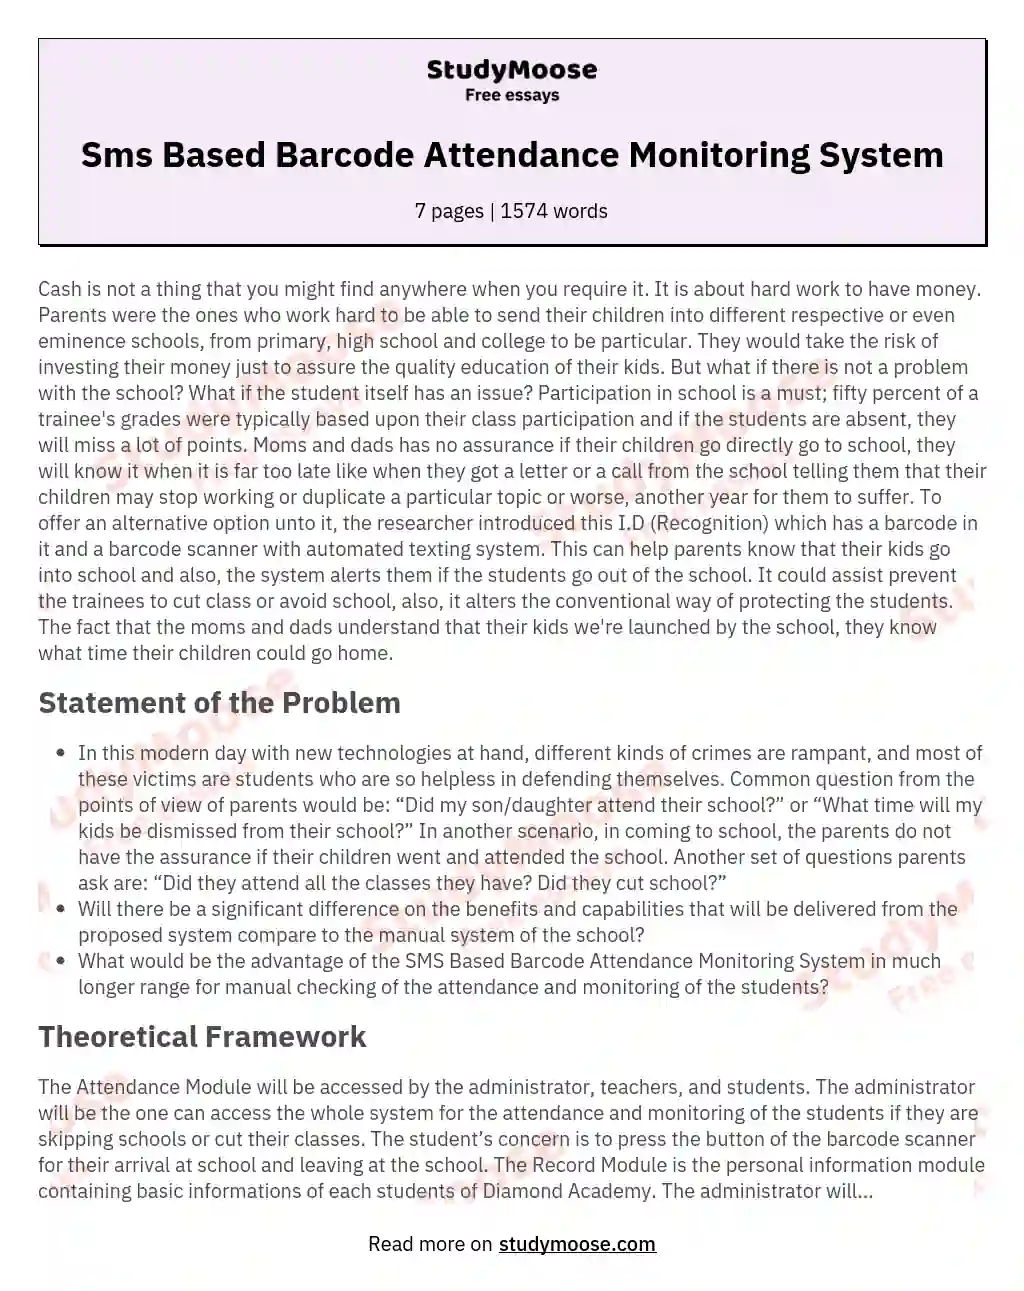 Sms Based Barcode Attendance Monitoring System essay